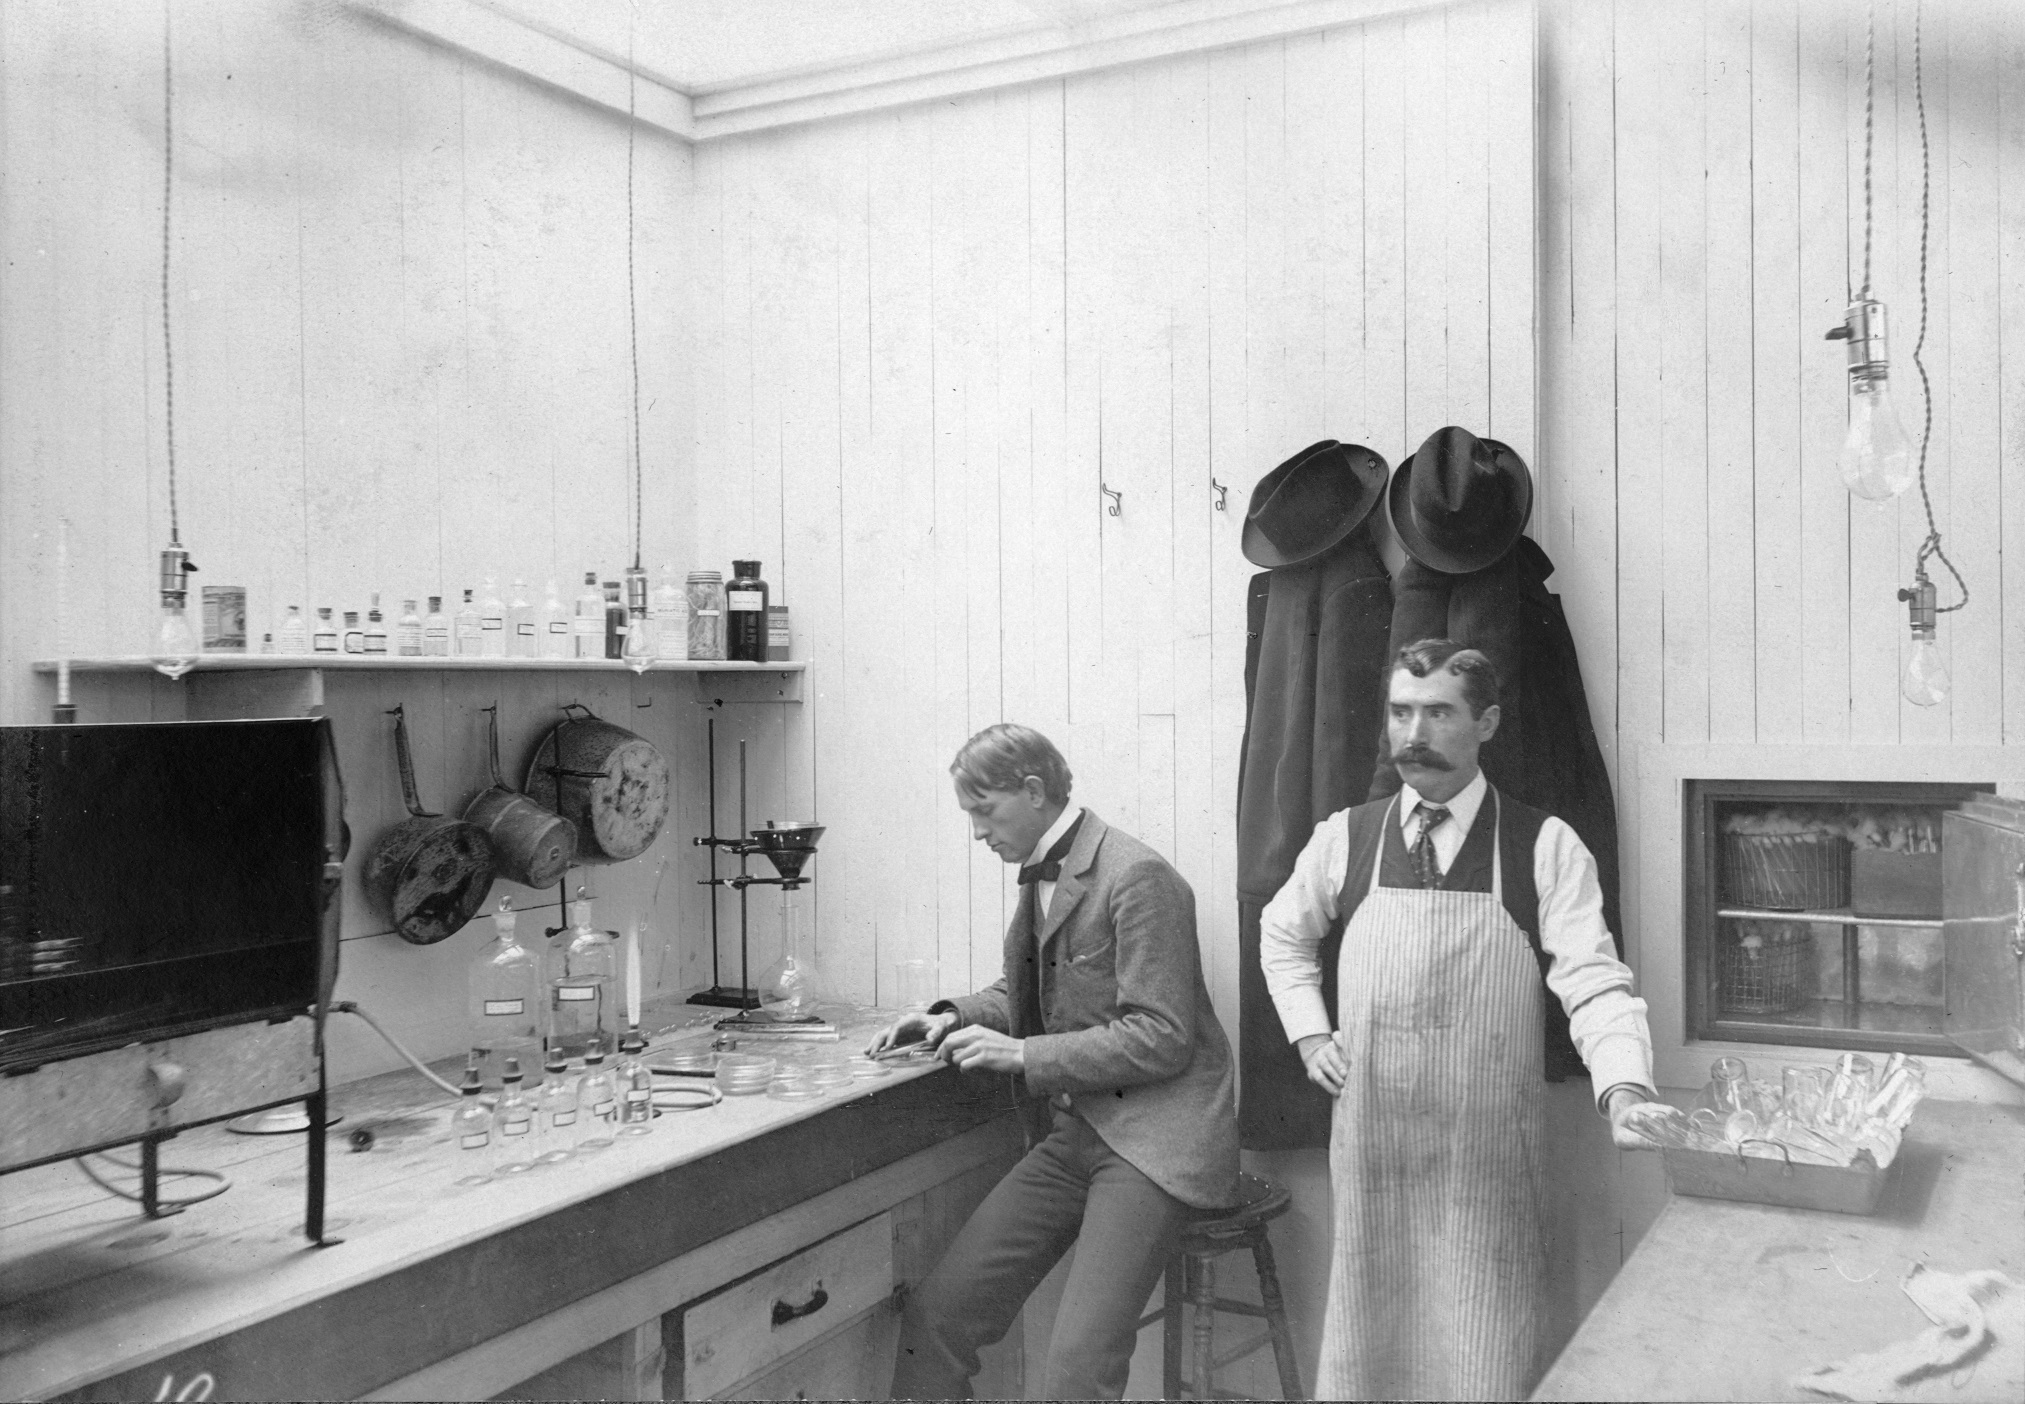 Employees hard at work in the water quality lab of the Denver Union Water Company in 1896.